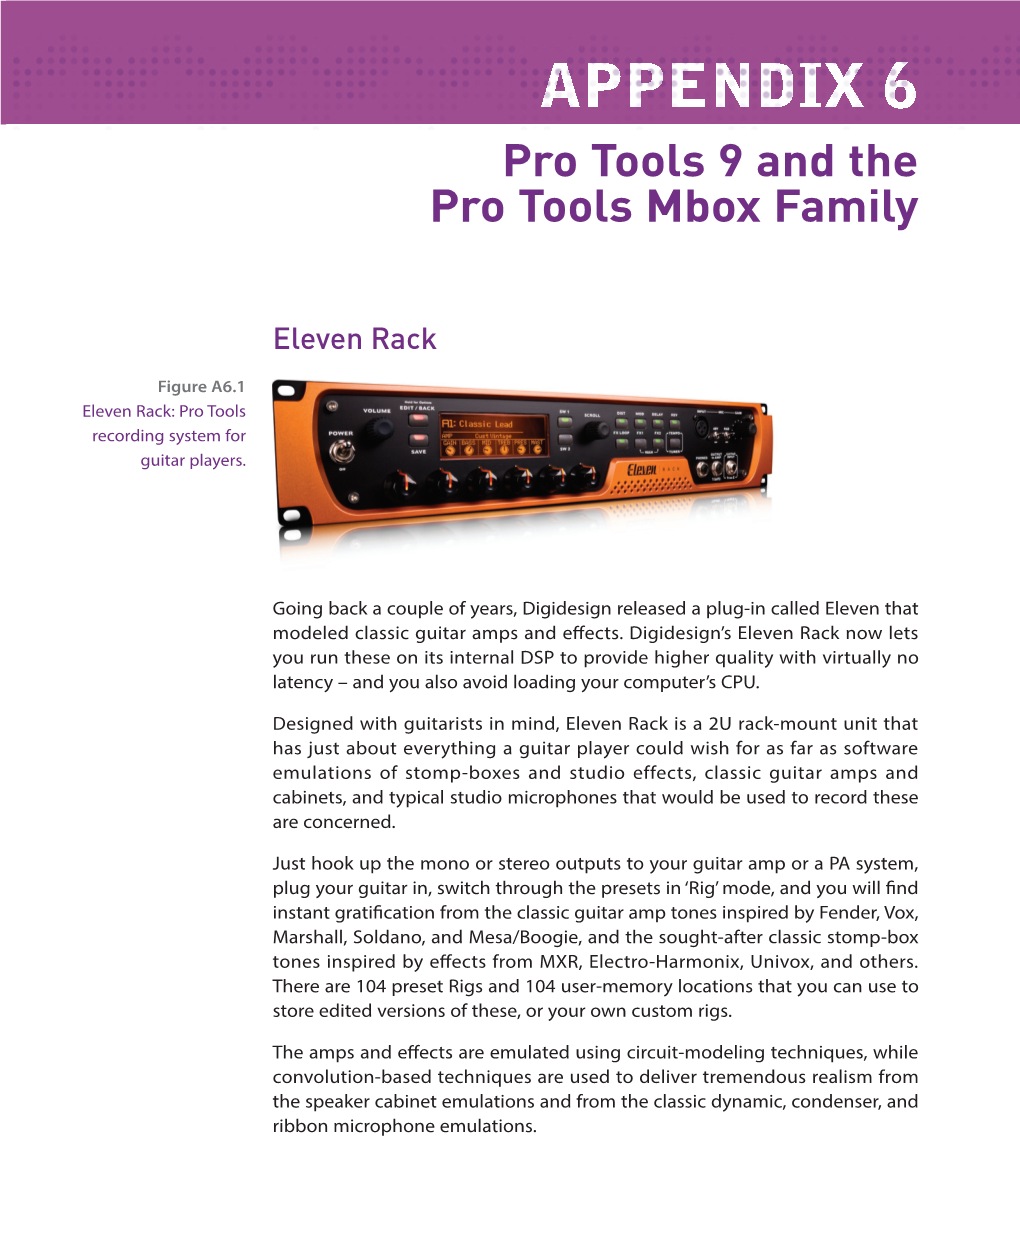 Pro Tools 9 and the Pro Tools Mbox Family